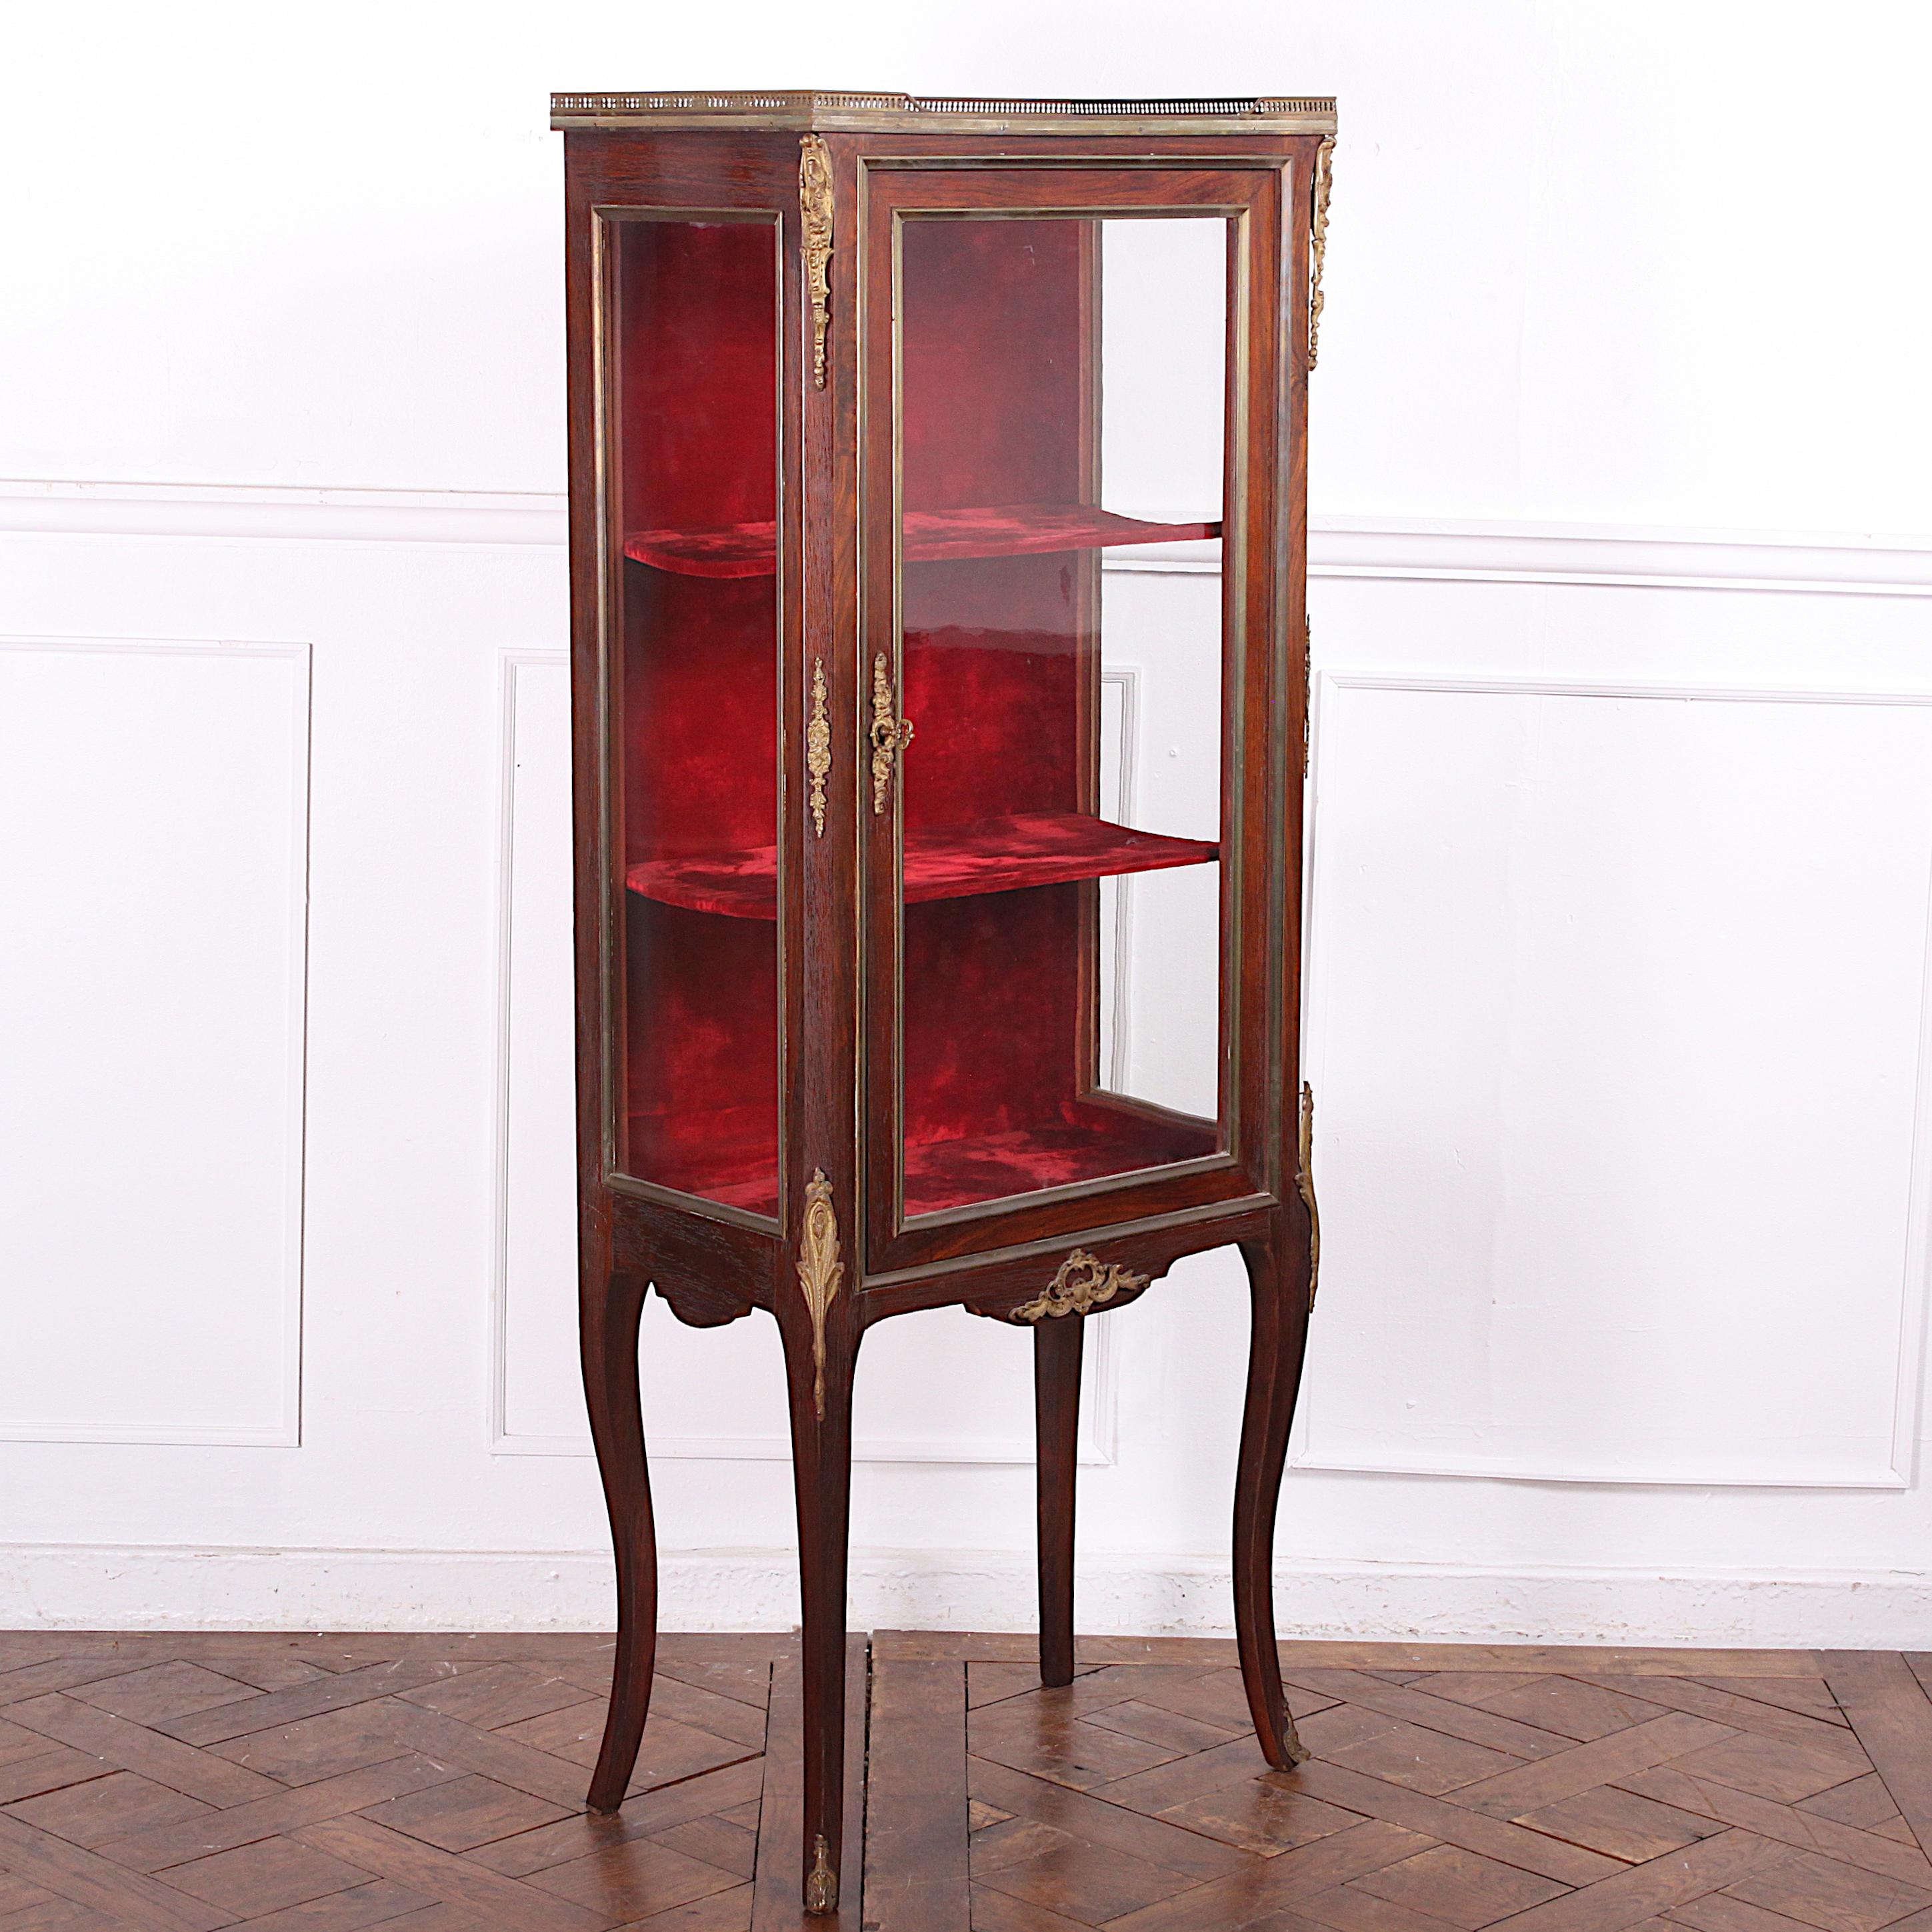 A simple well-proportioned smaller 19th century French mahogany vitrine with original velvet interior in very good original condition. Marble top with pierced brass gallery and ormolu mounts to the case and elegant legs.